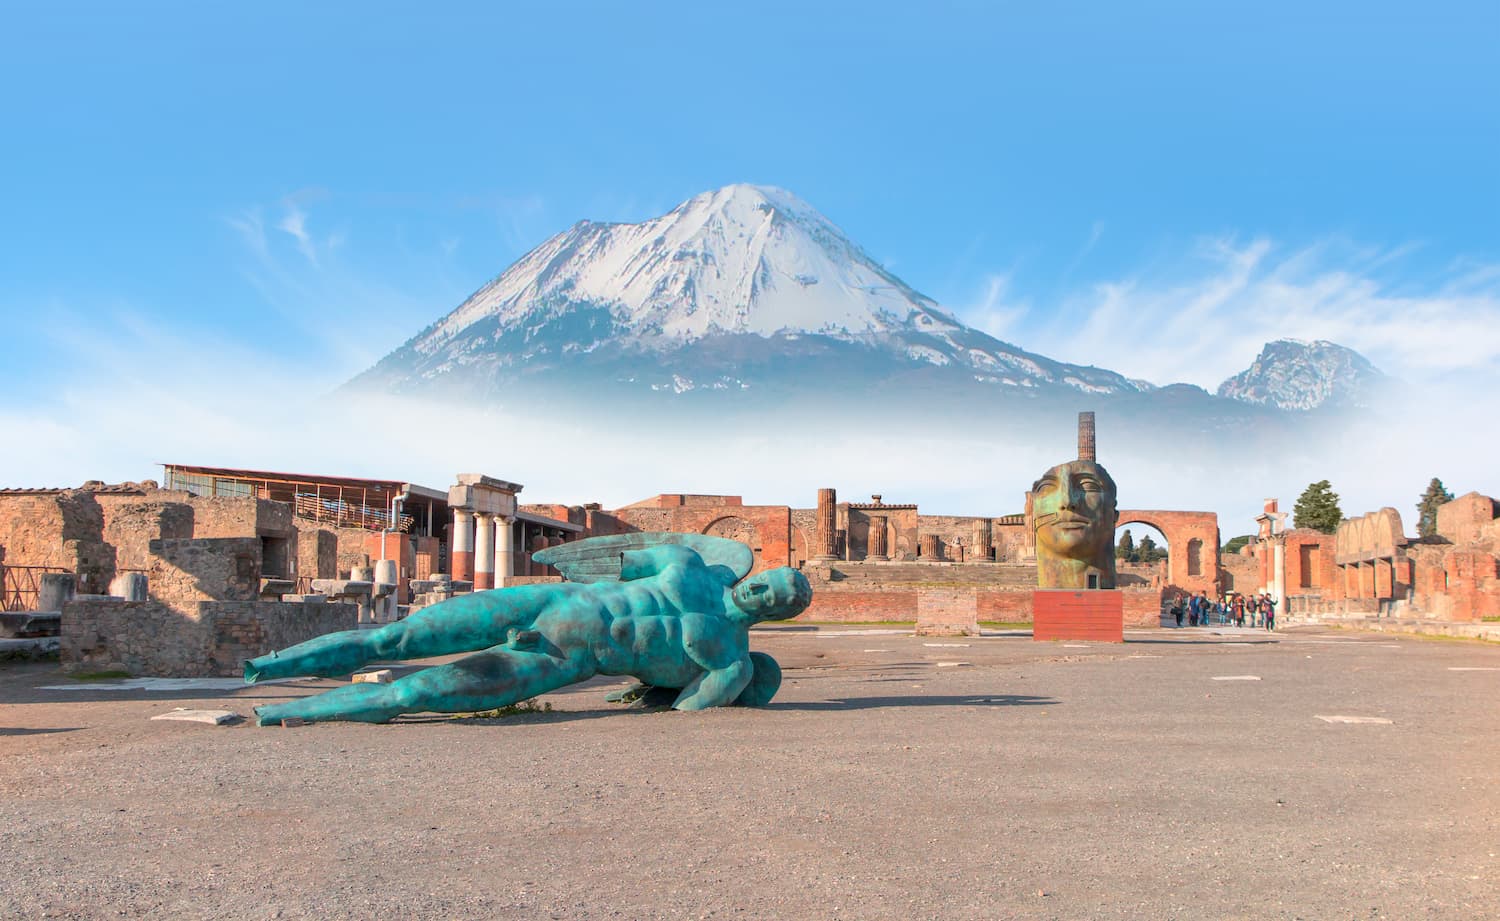 Pompeii Day Trip From Rome: All You Need To Know